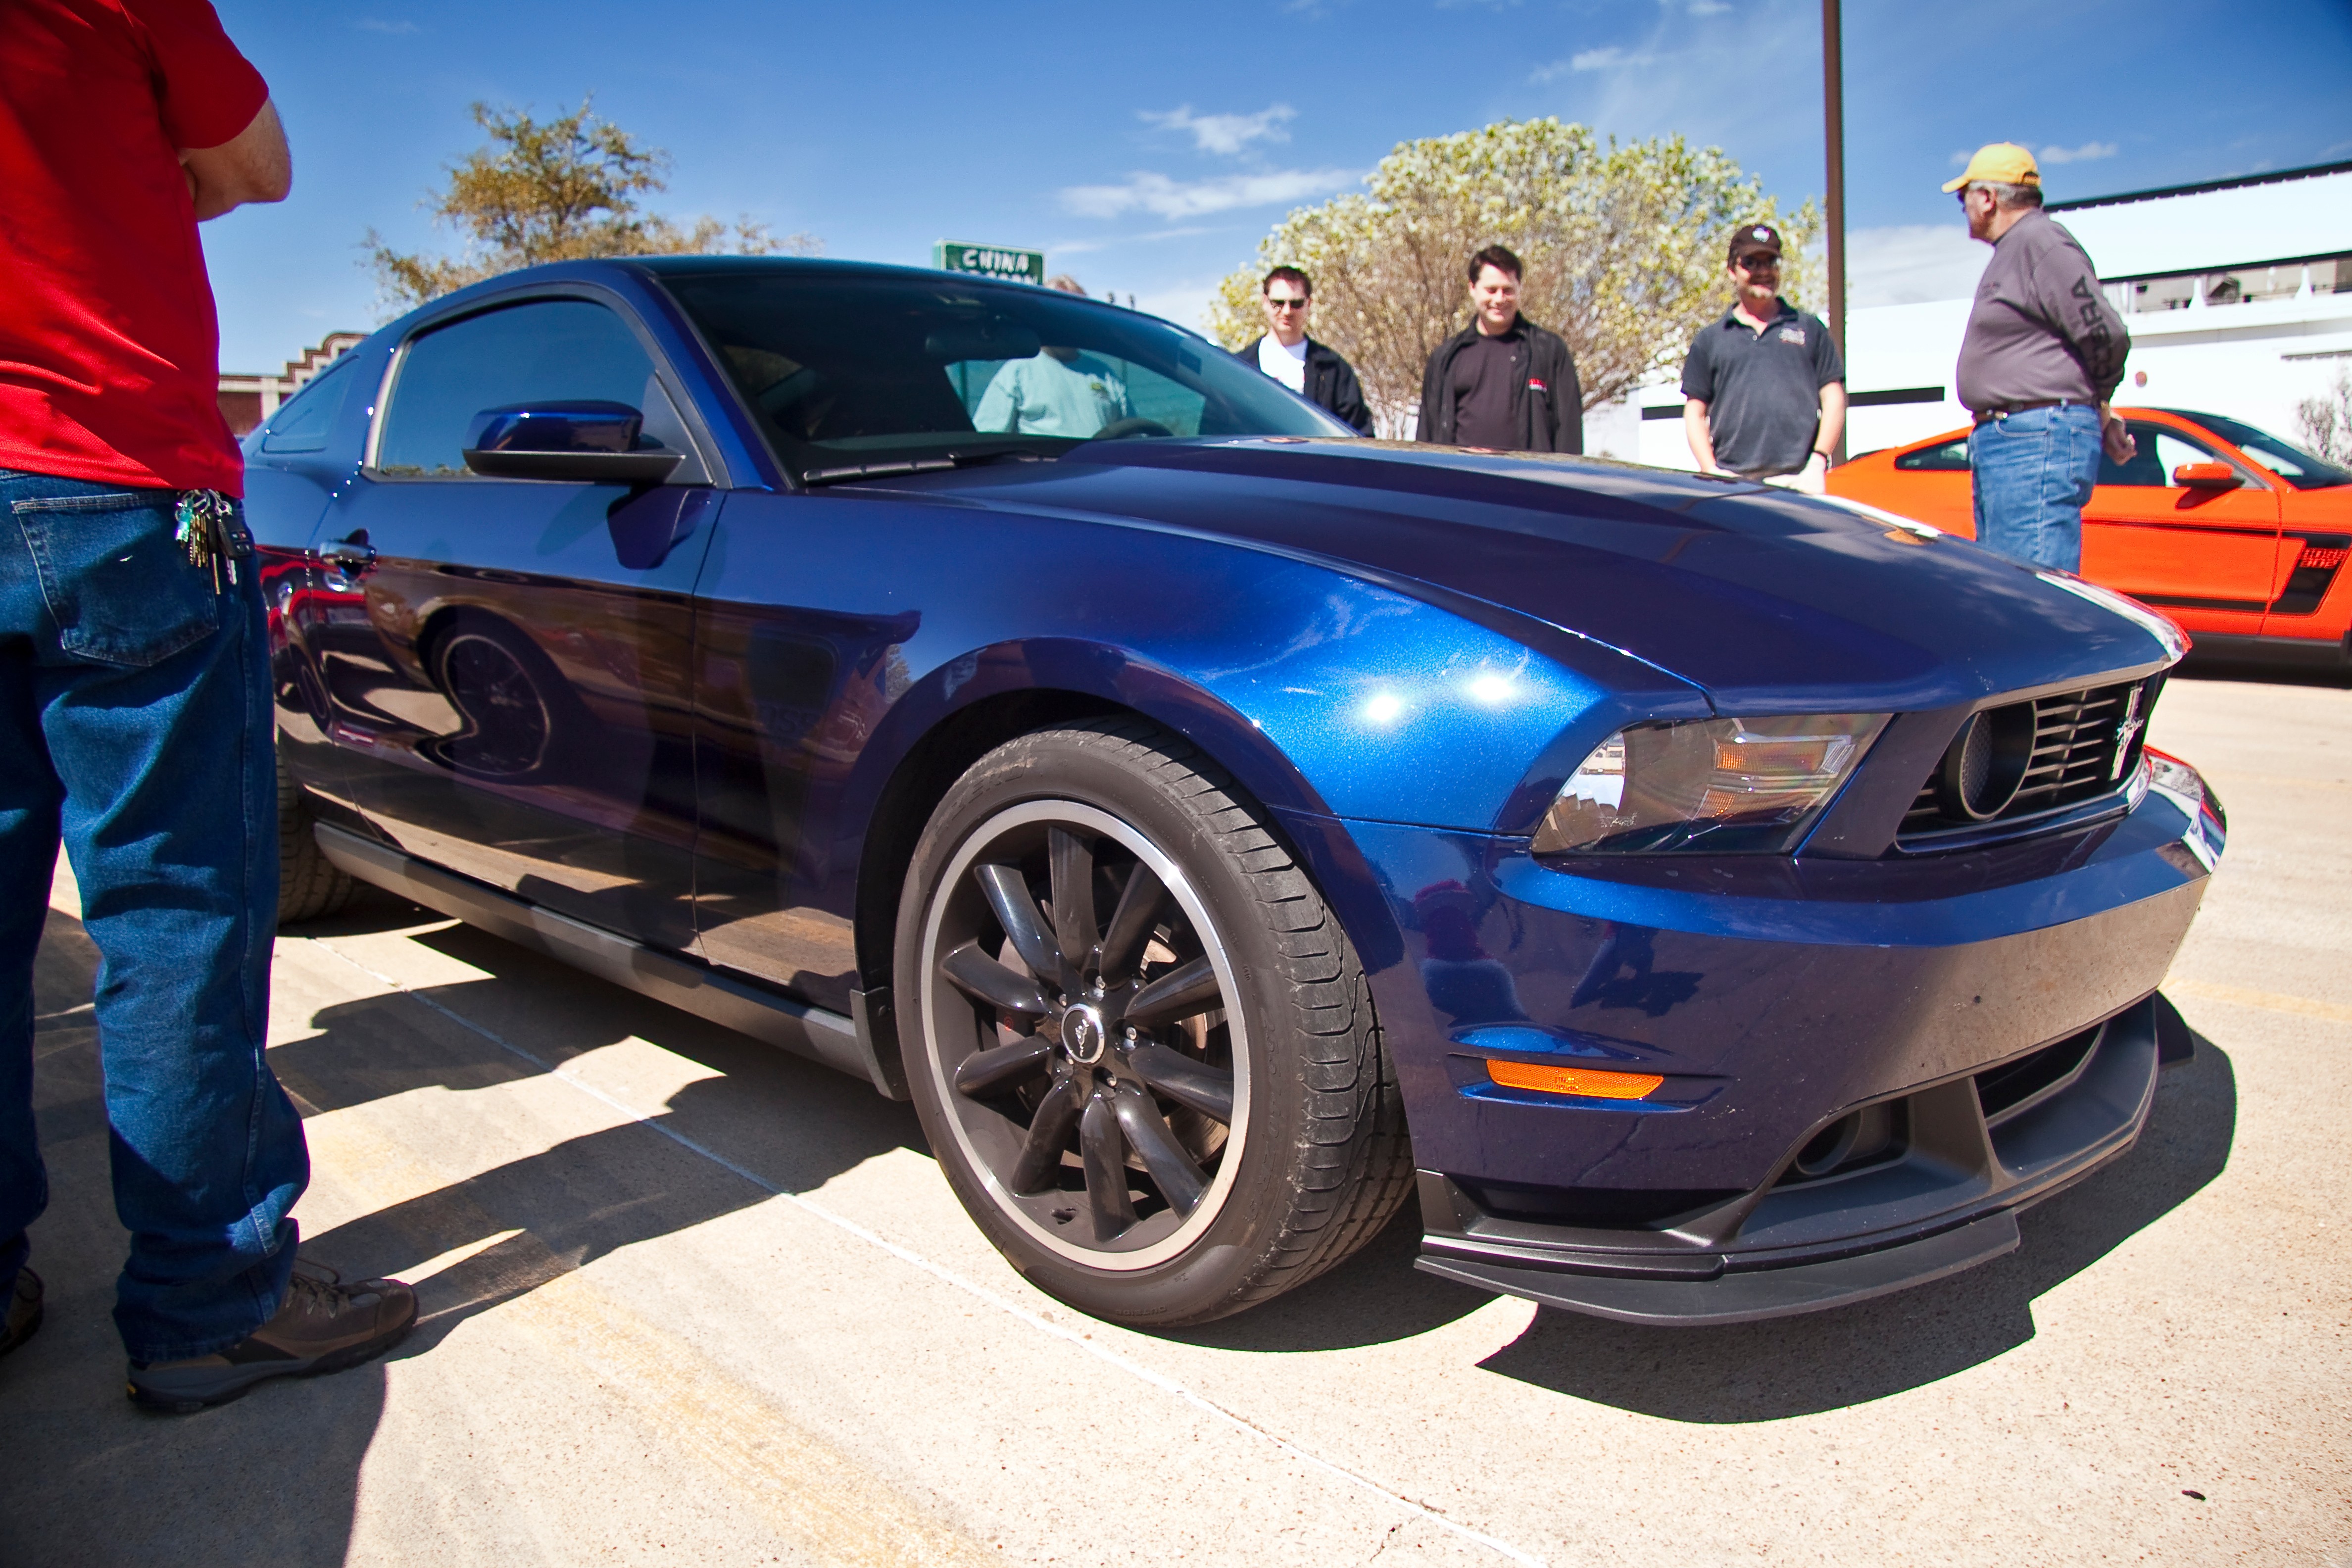 car, Shelby, Muscle Cars, Blue Cars Wallpaper